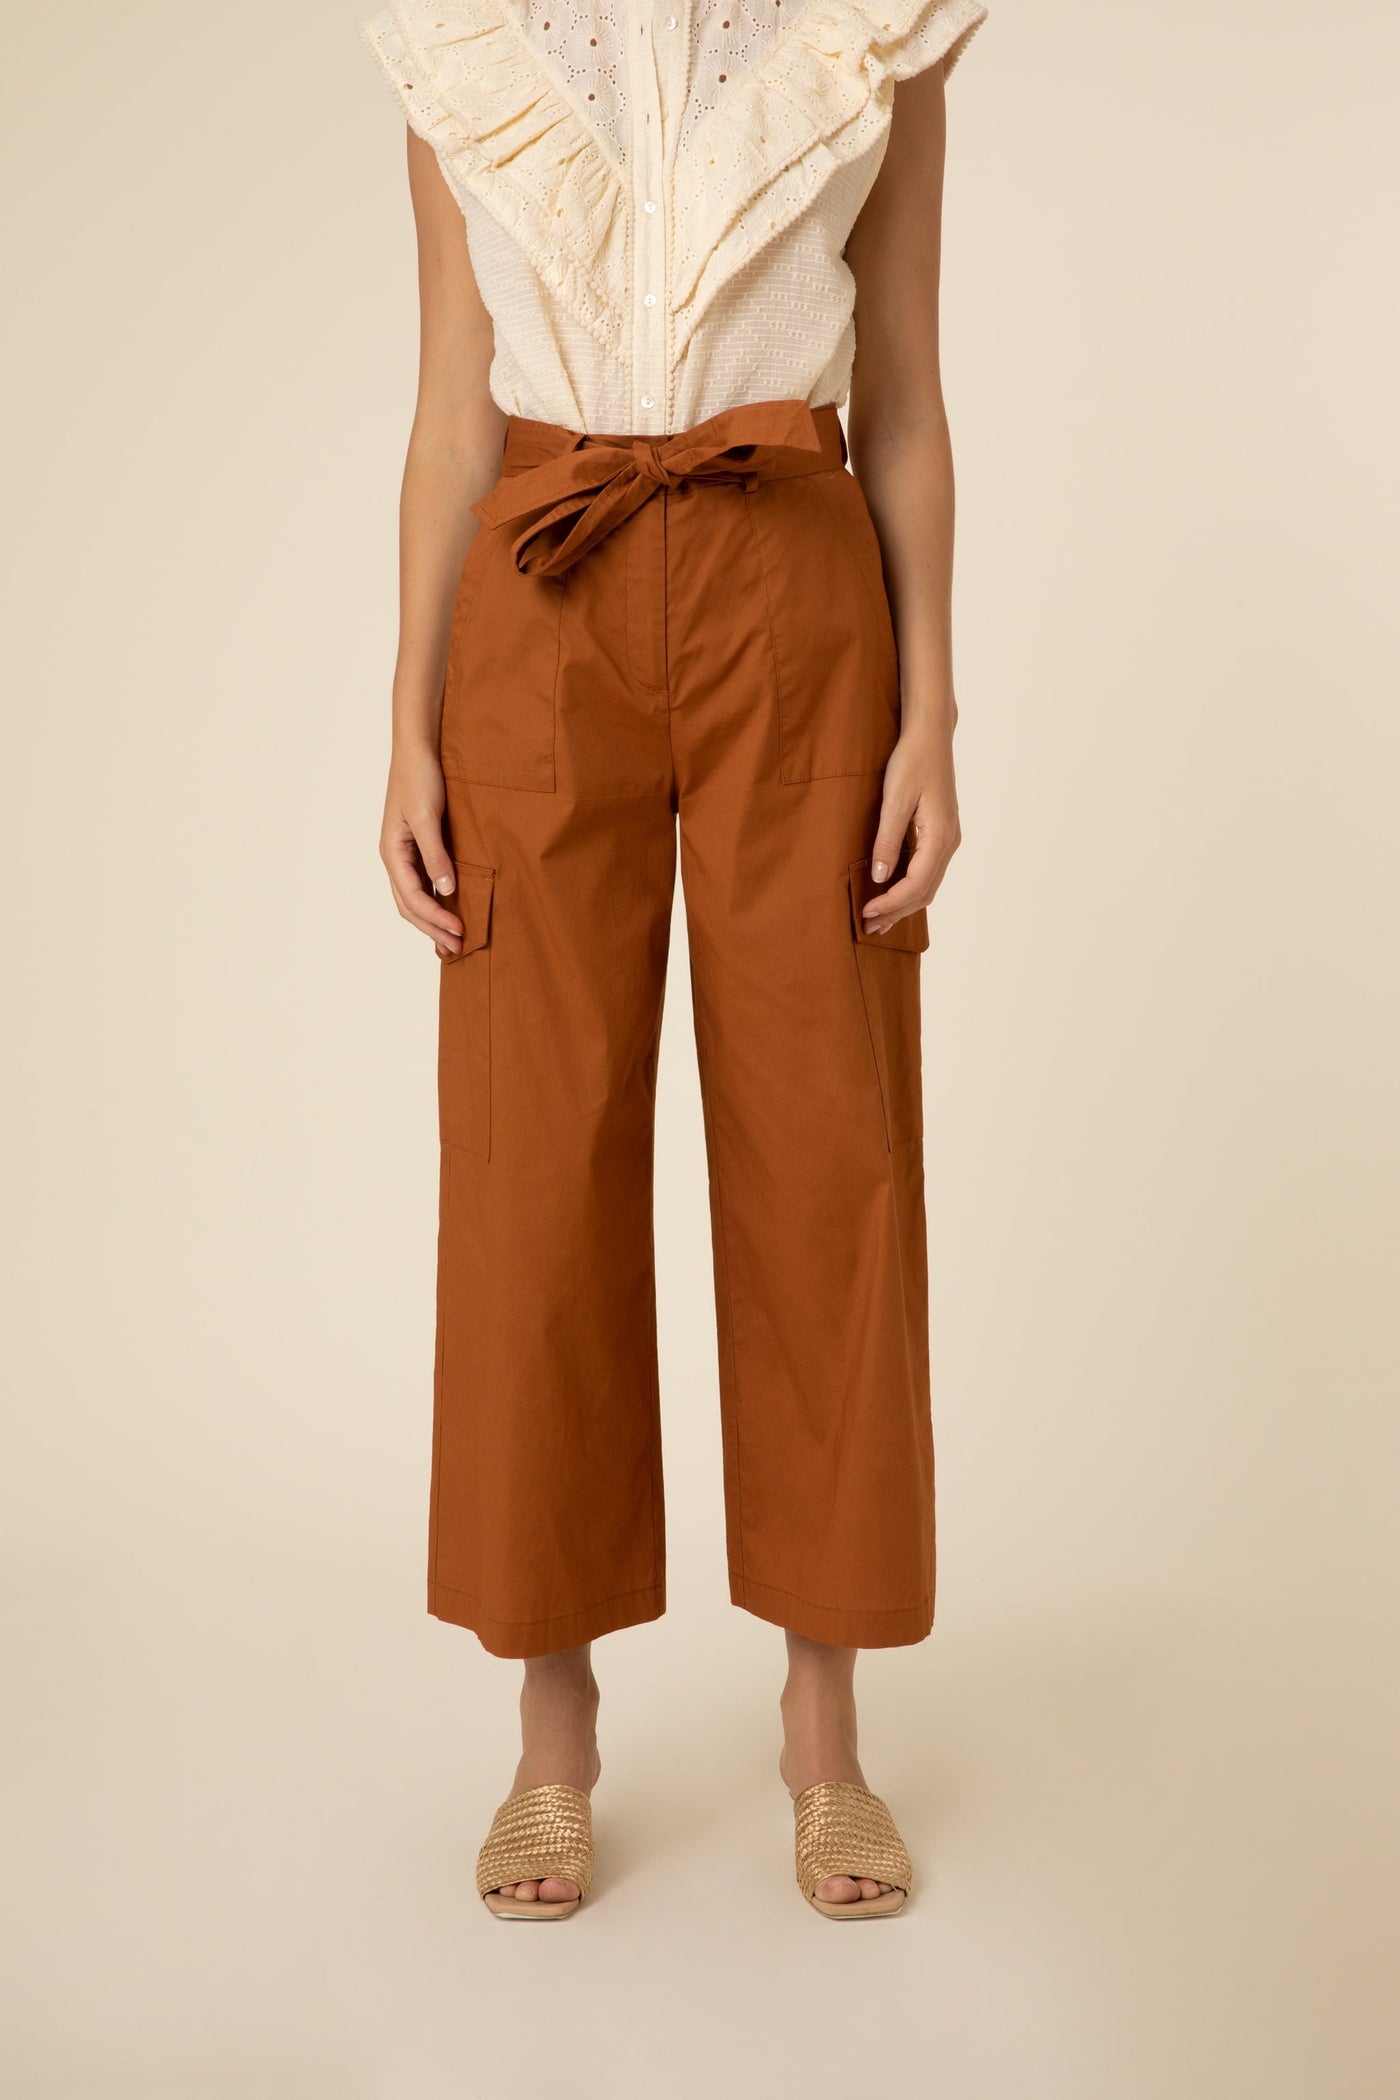 FRNCH Hilary Pant in Ocre - XS